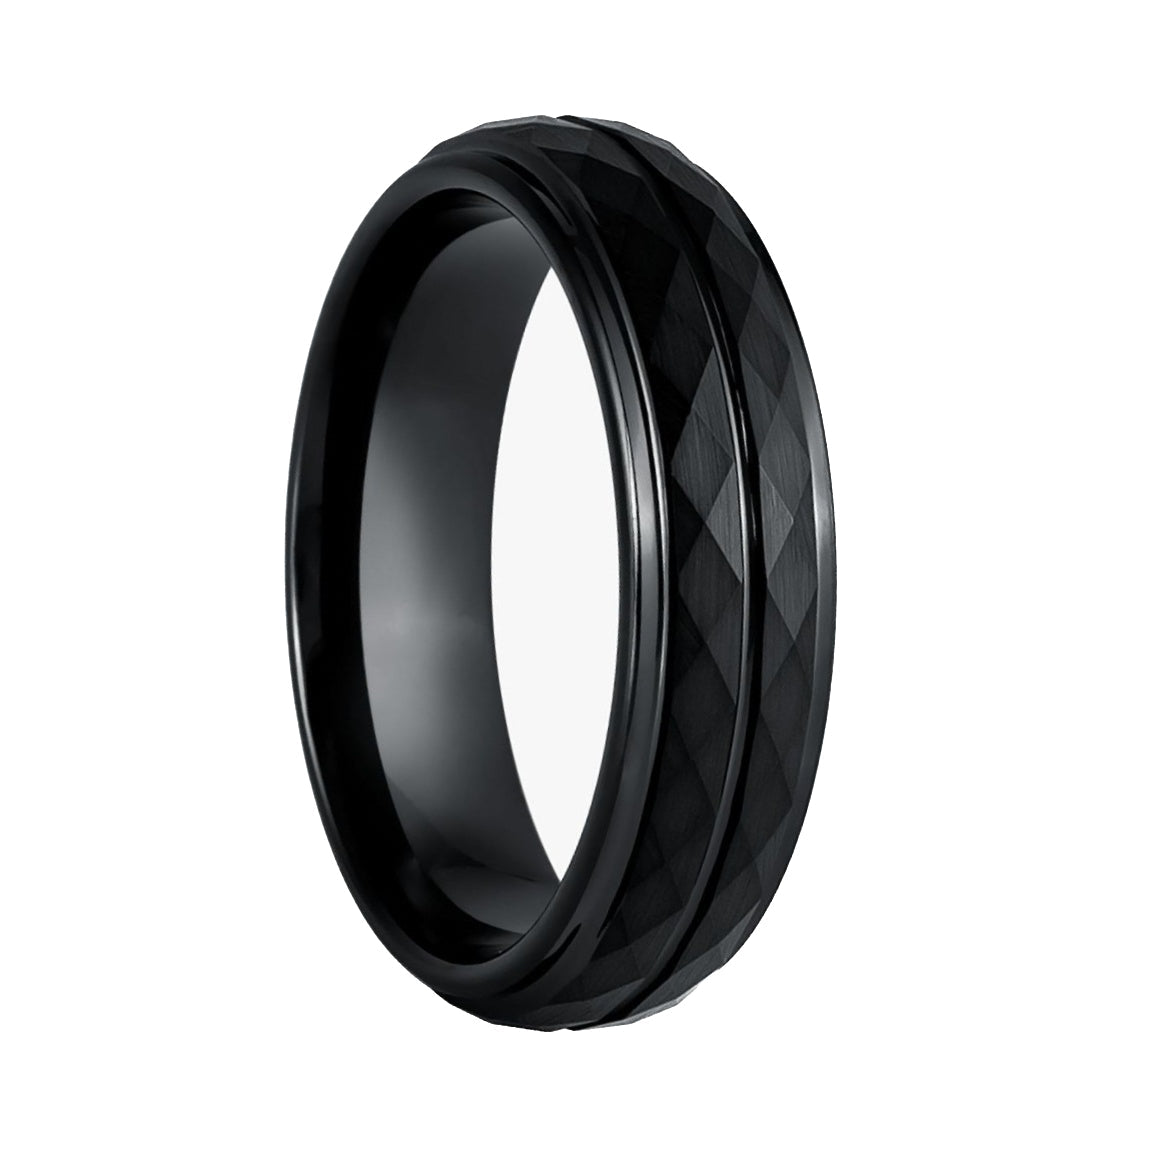 Geometric Faceted Black Tungsten Men's Wedding Band with Dual Grooves